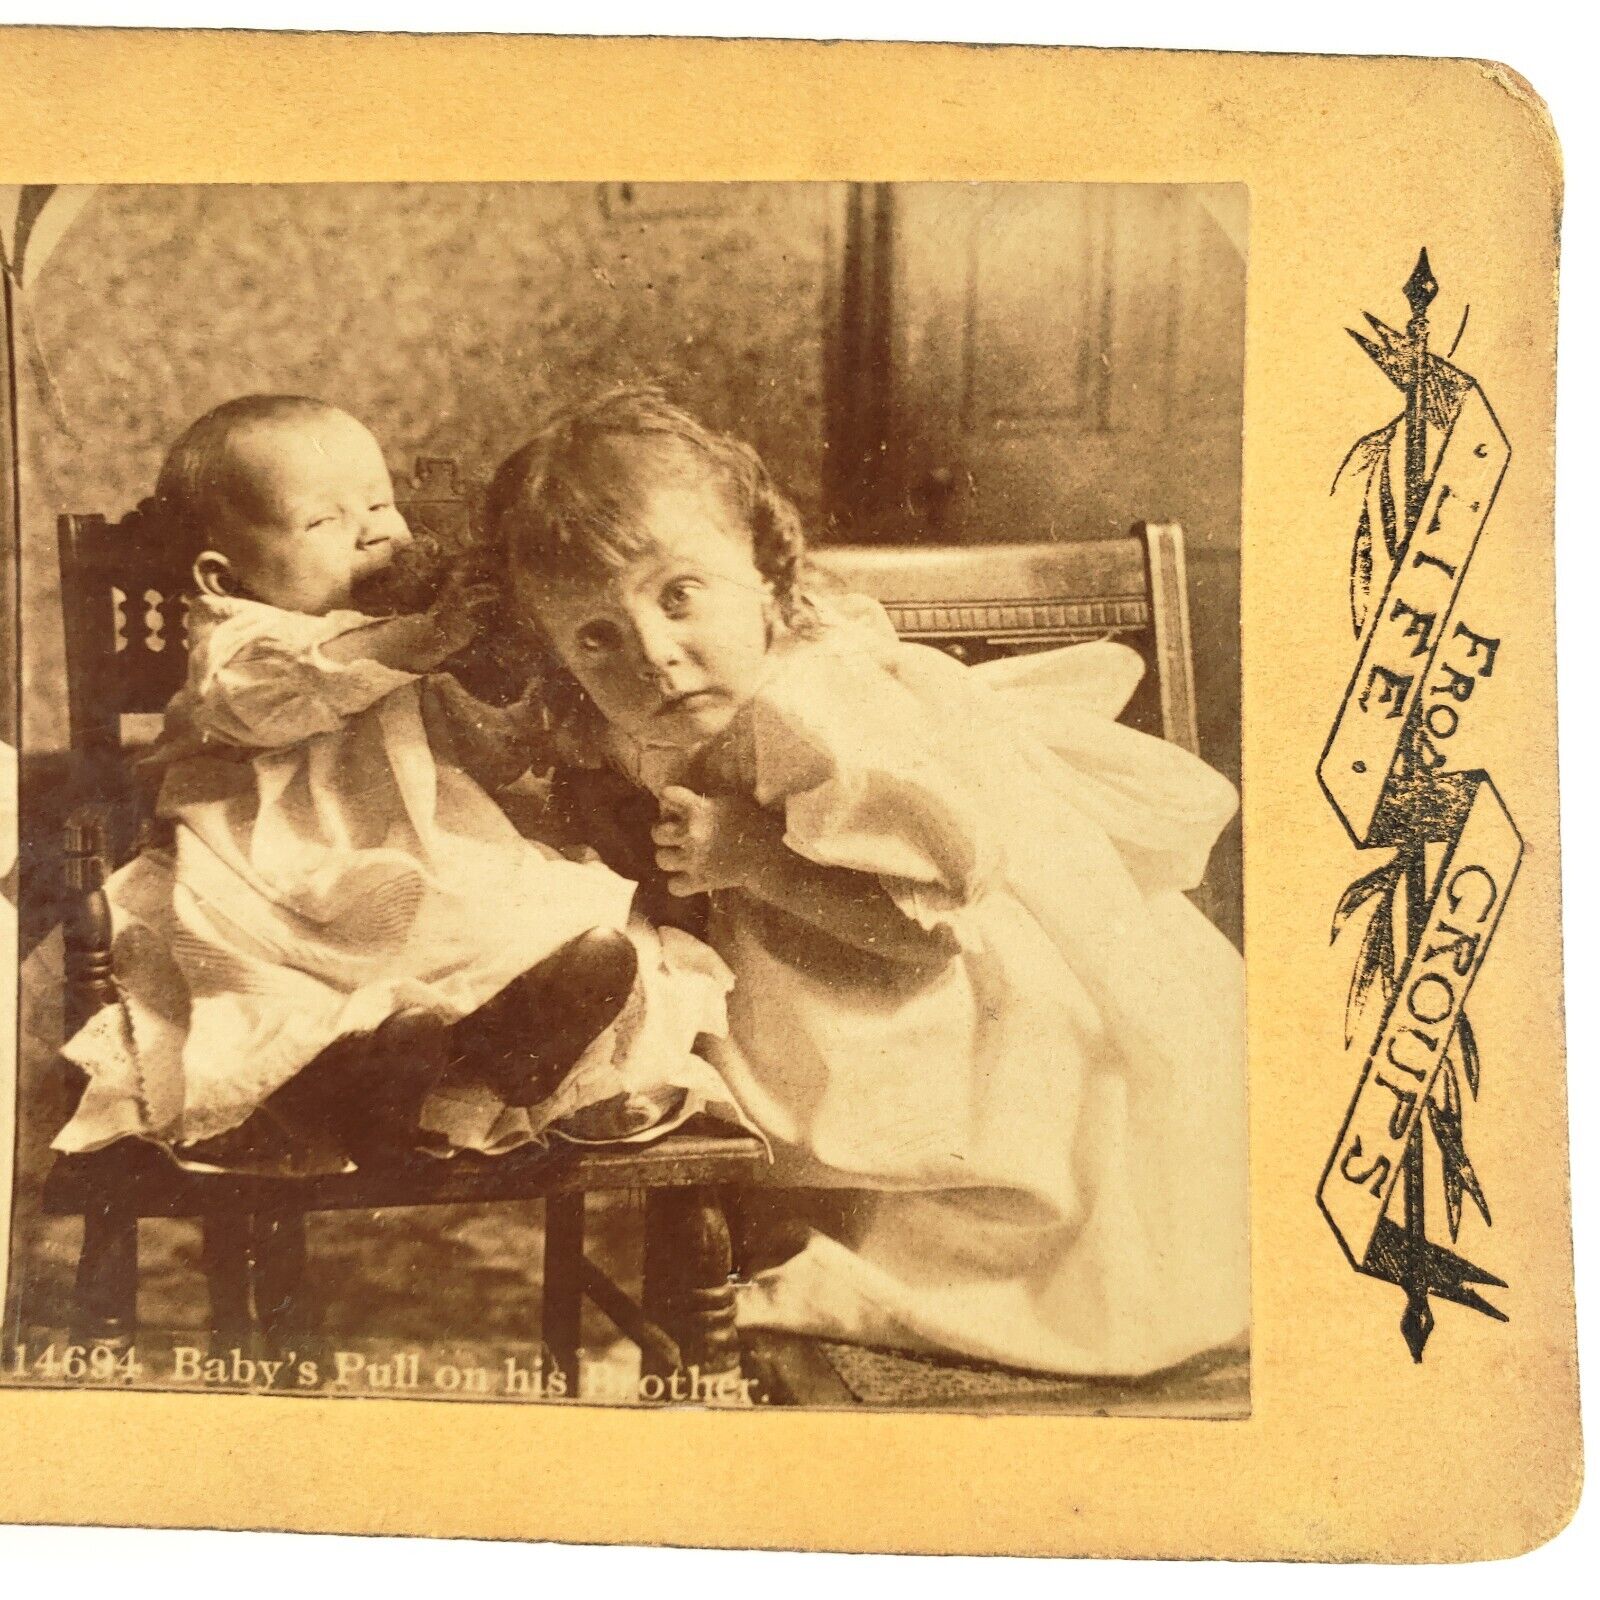 Baby Pulling Brother's Hair Stereoview c1890 Childhood Antique Photo Card A1934